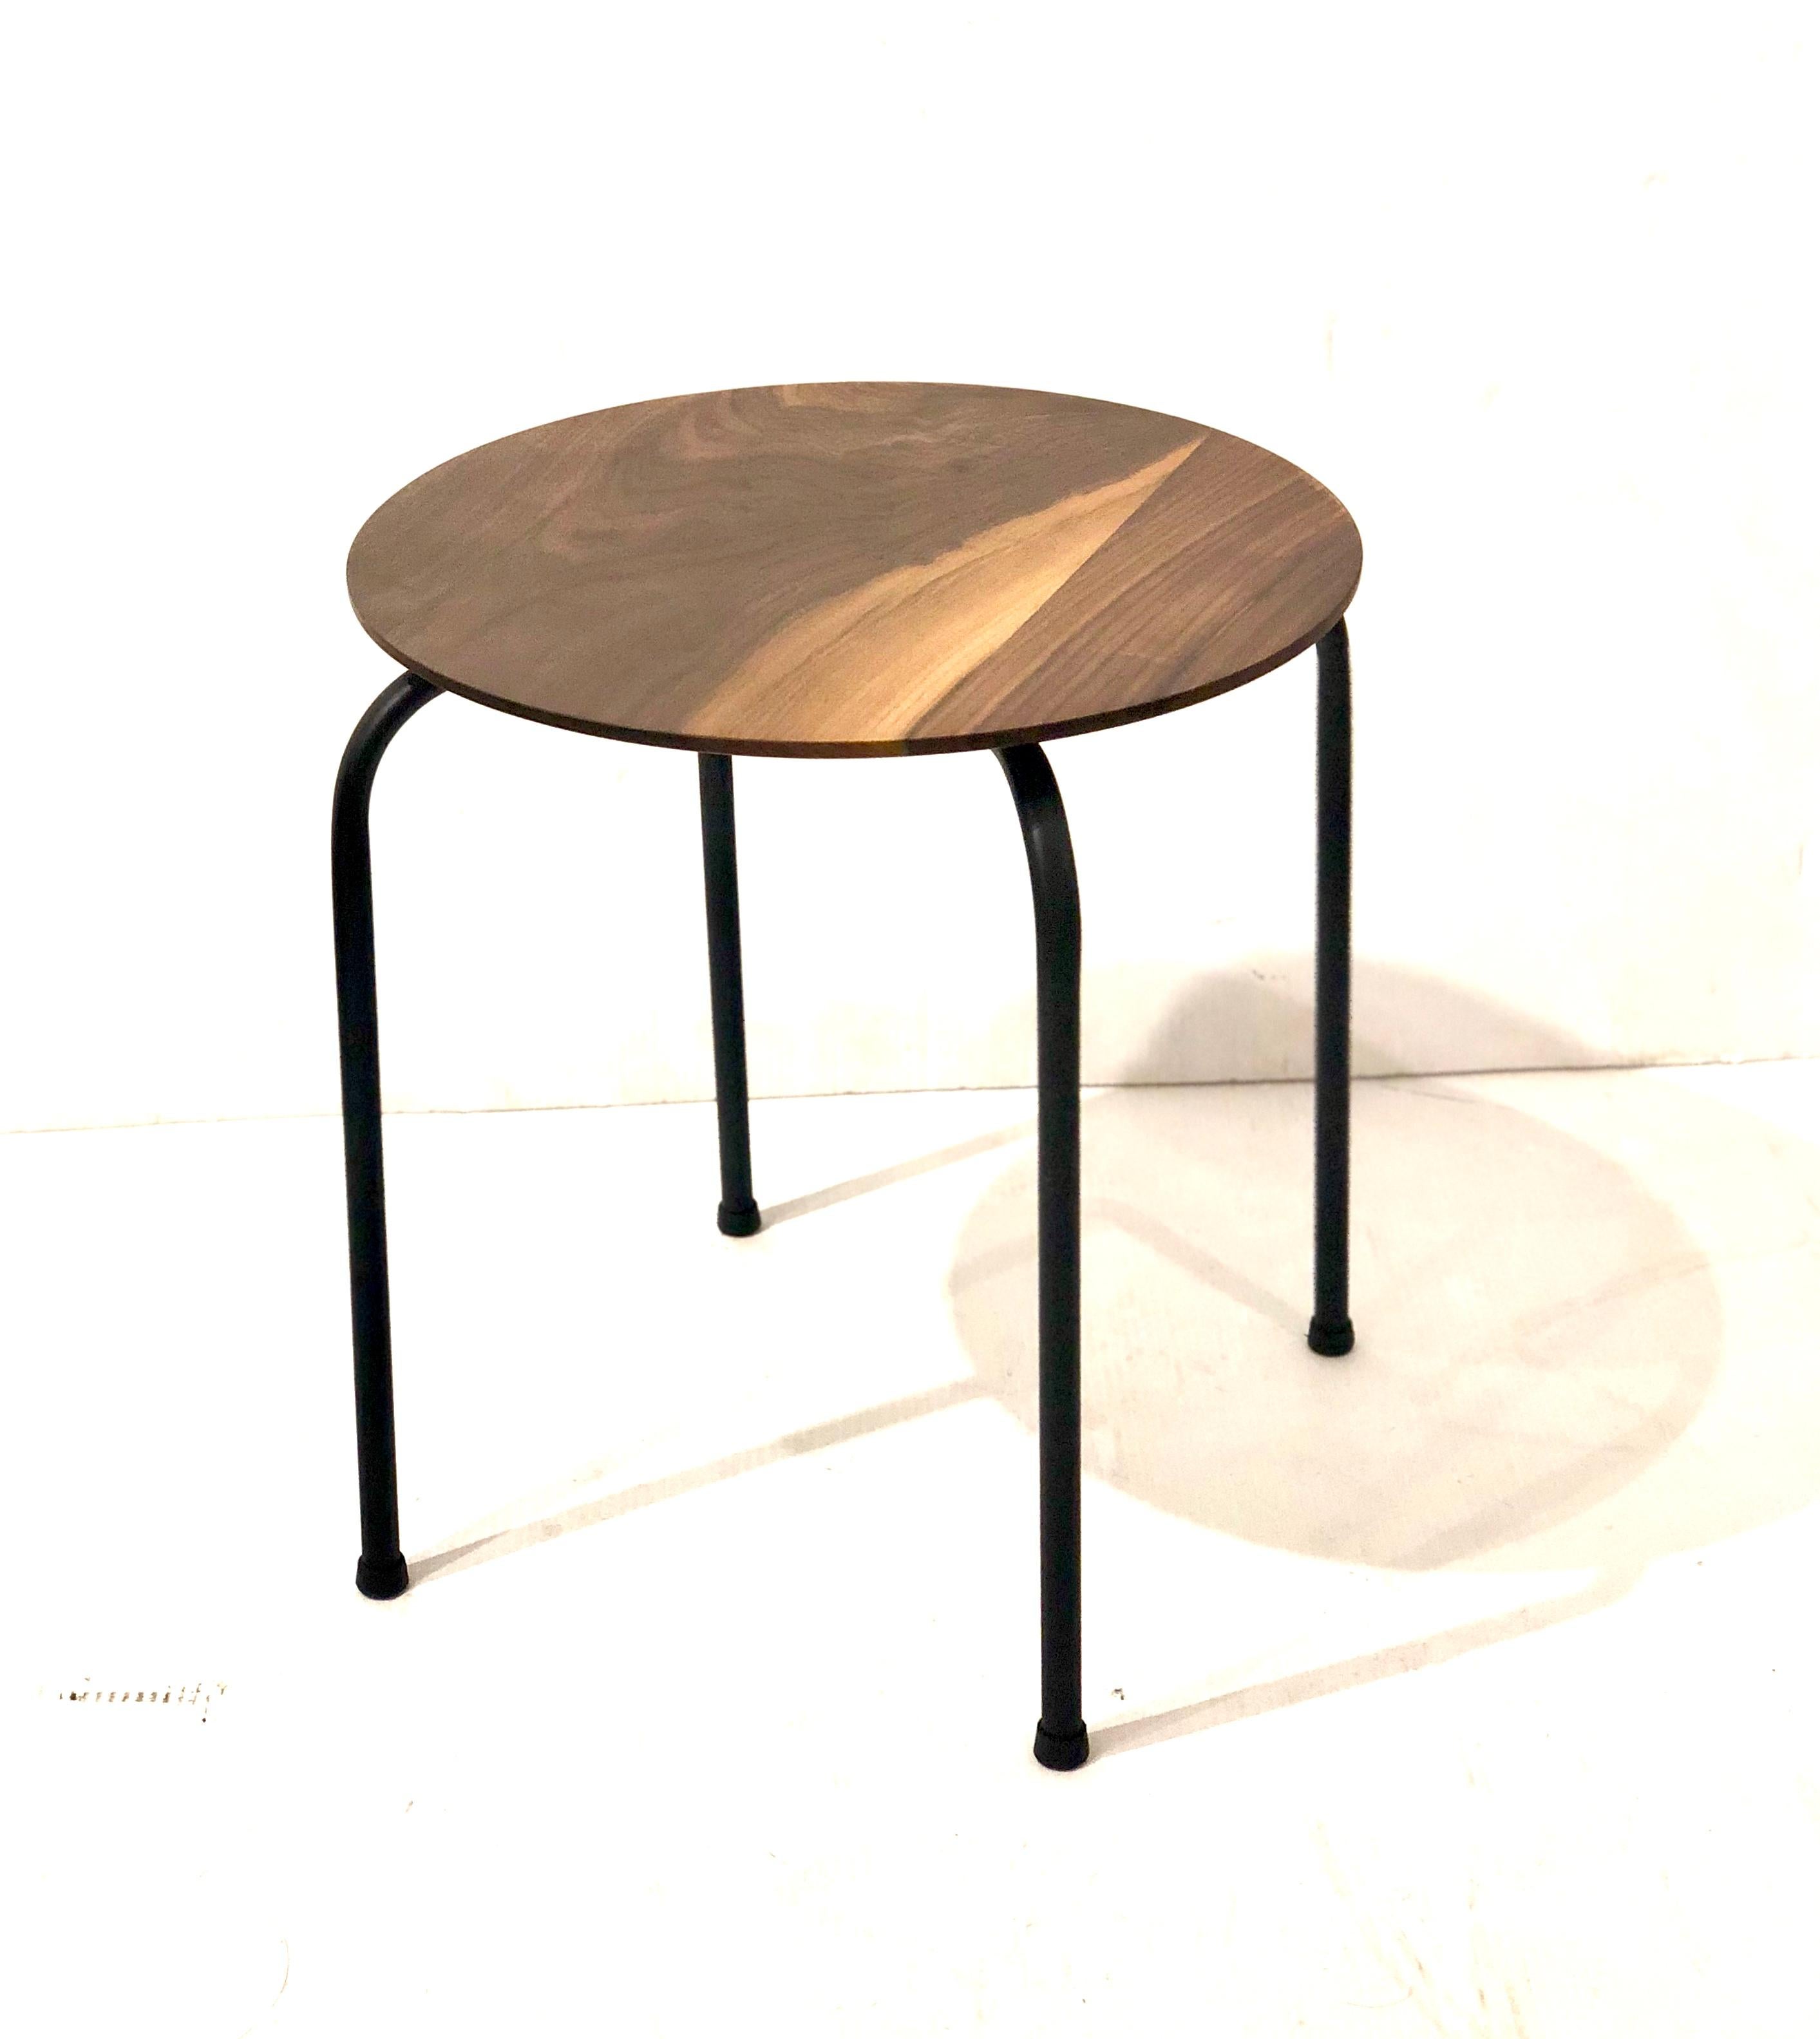 Simple elegant solid beveled walnut round top, cocktail table with black metal painted iron legs and plastic feet, circa 1970s. The table has been refinished and repainted it can be used as a stool or table.